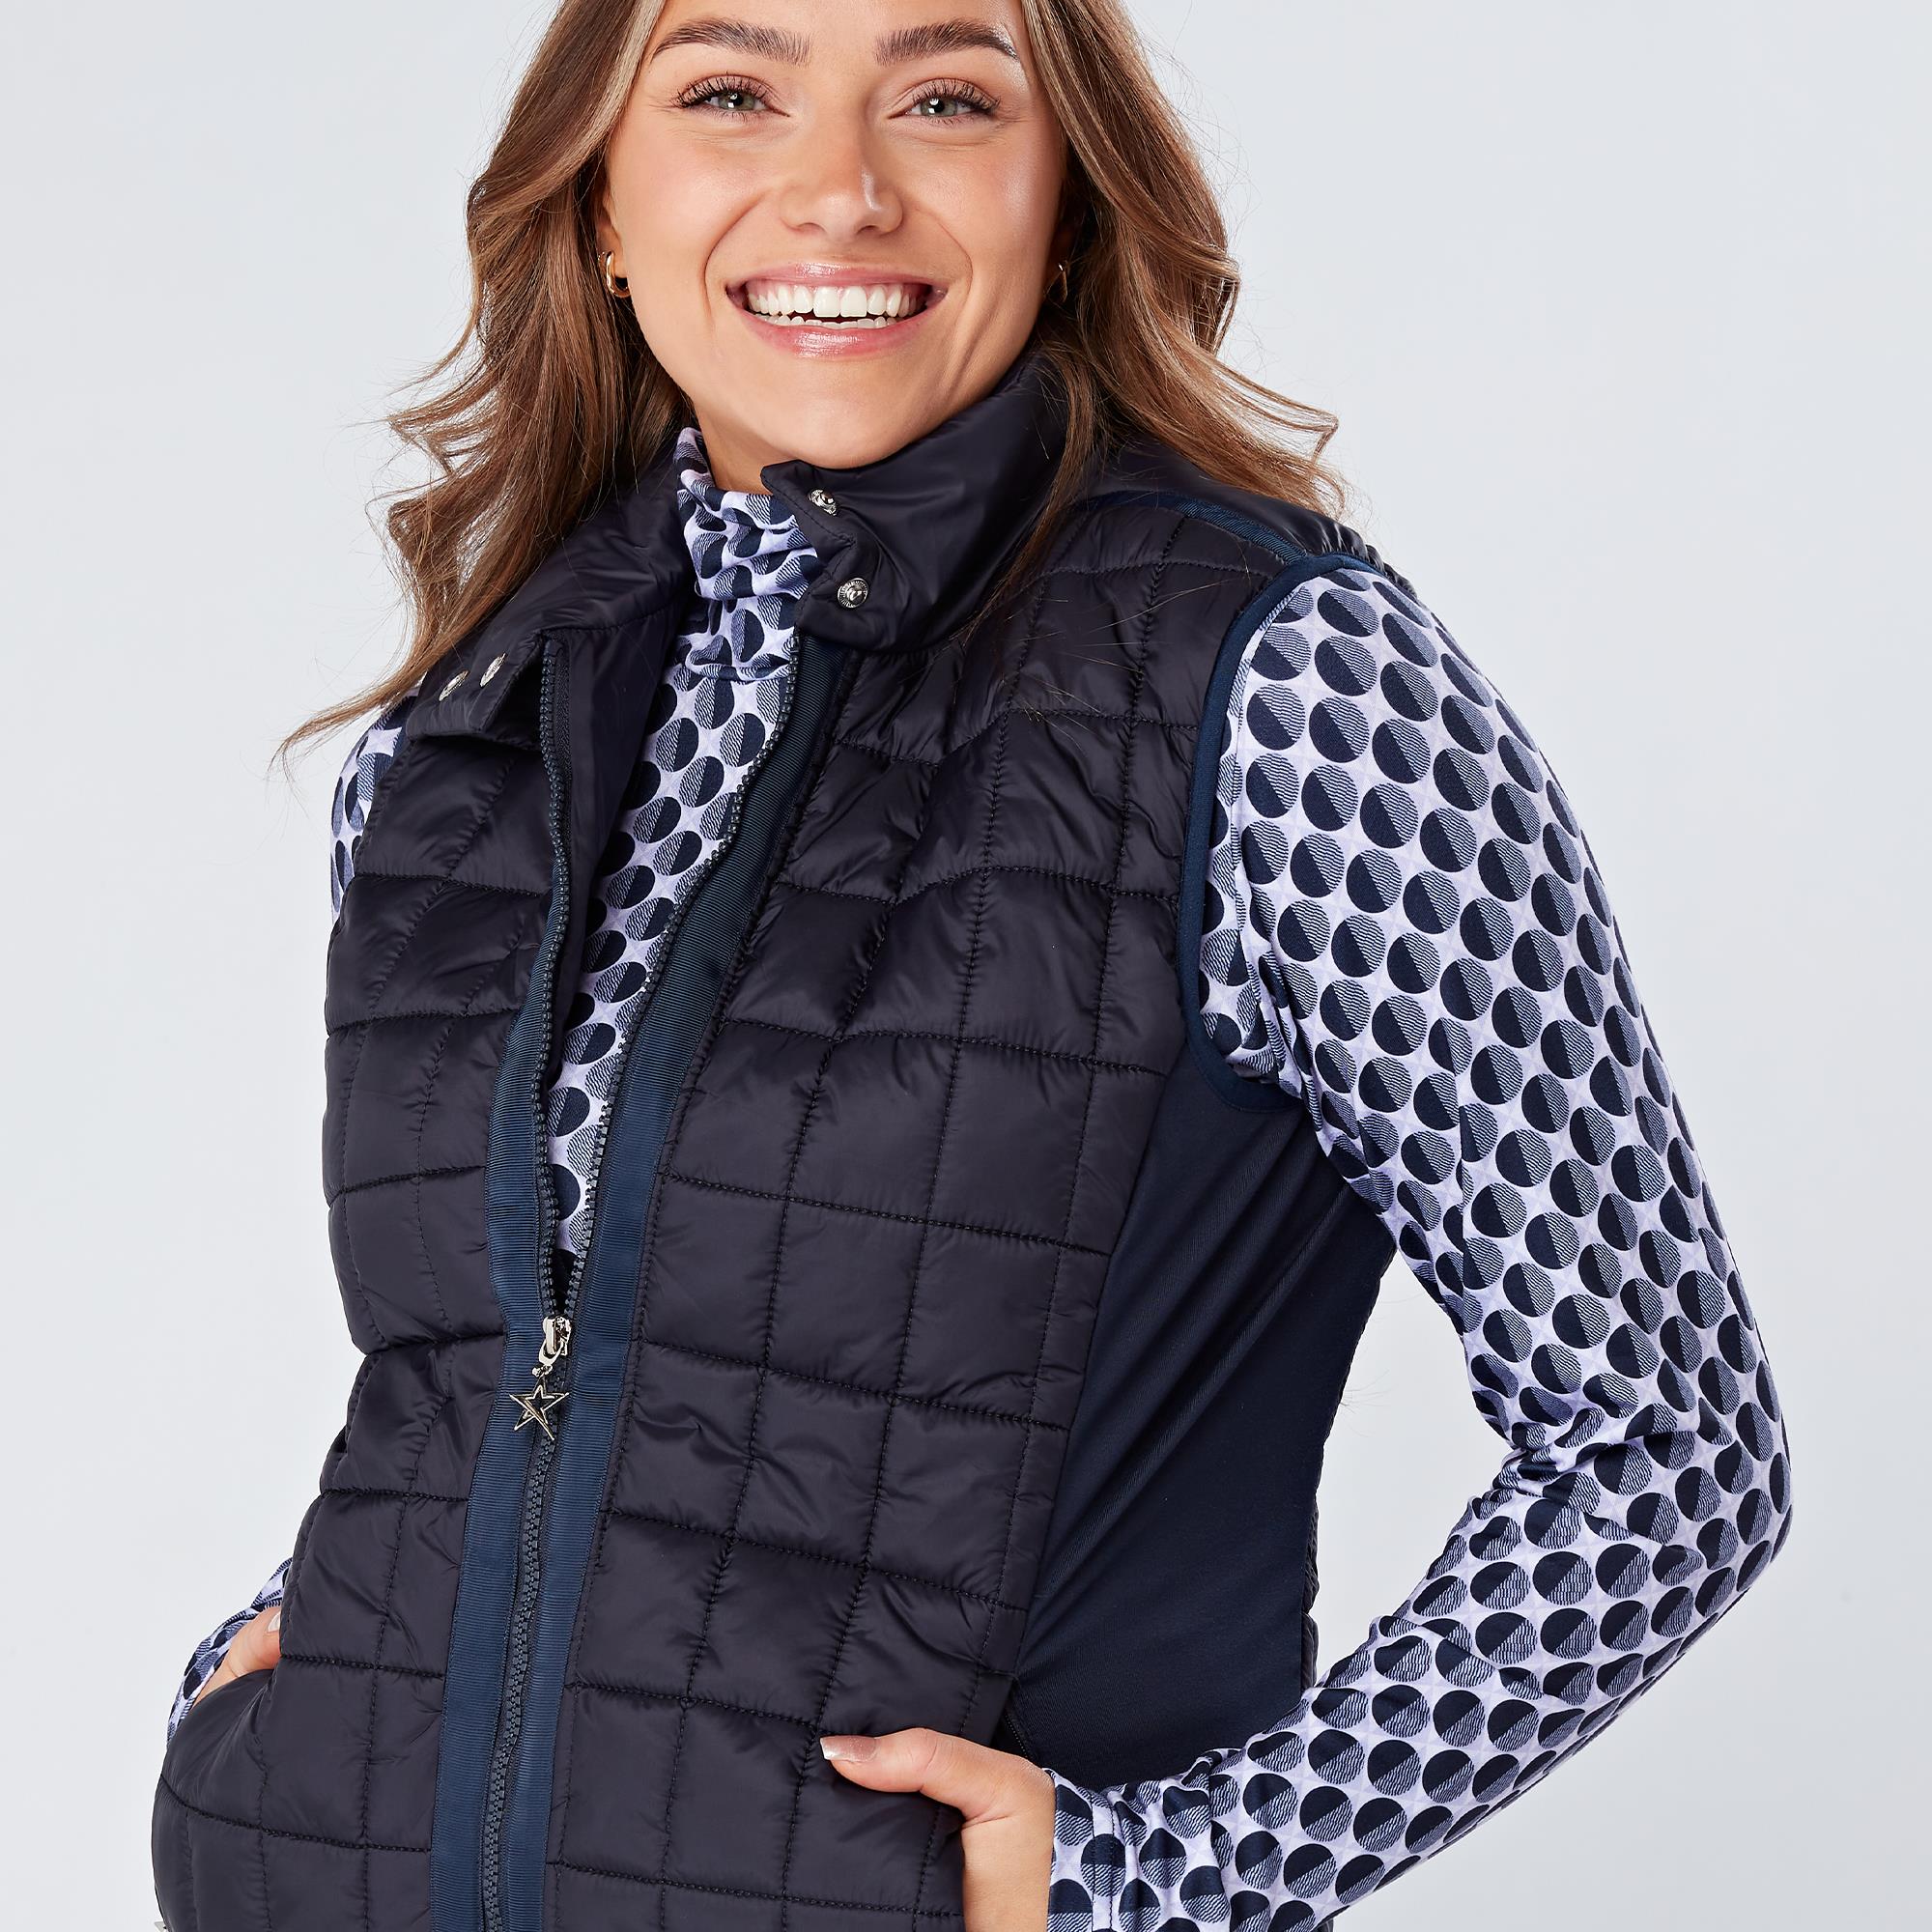 Swing Out Sister Valerie Active Ladies Golf Vest Navy